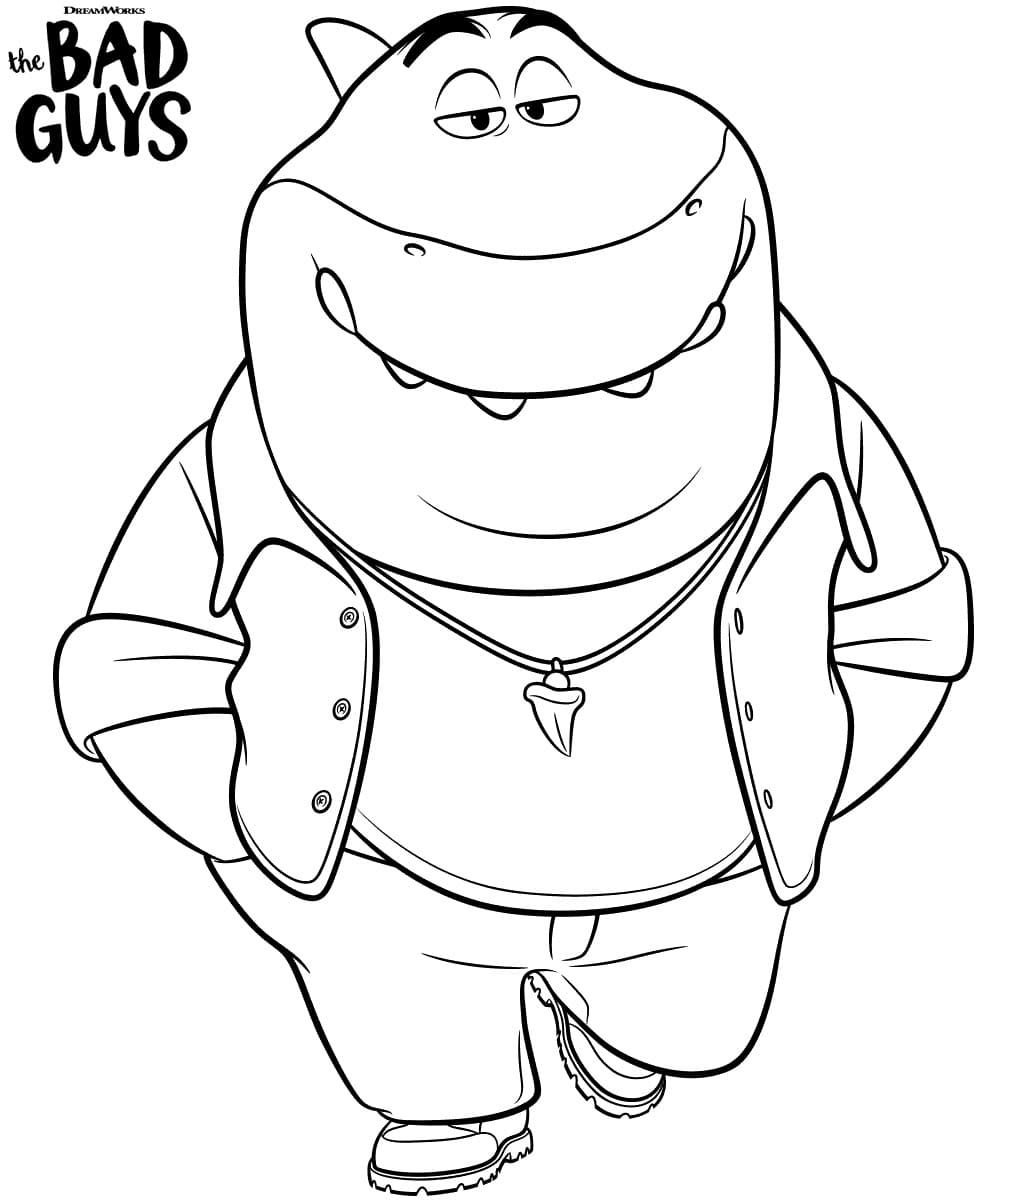 Mr. Shark from The Bad Guys Coloring Page - Free Printable Coloring Pages  for Kids